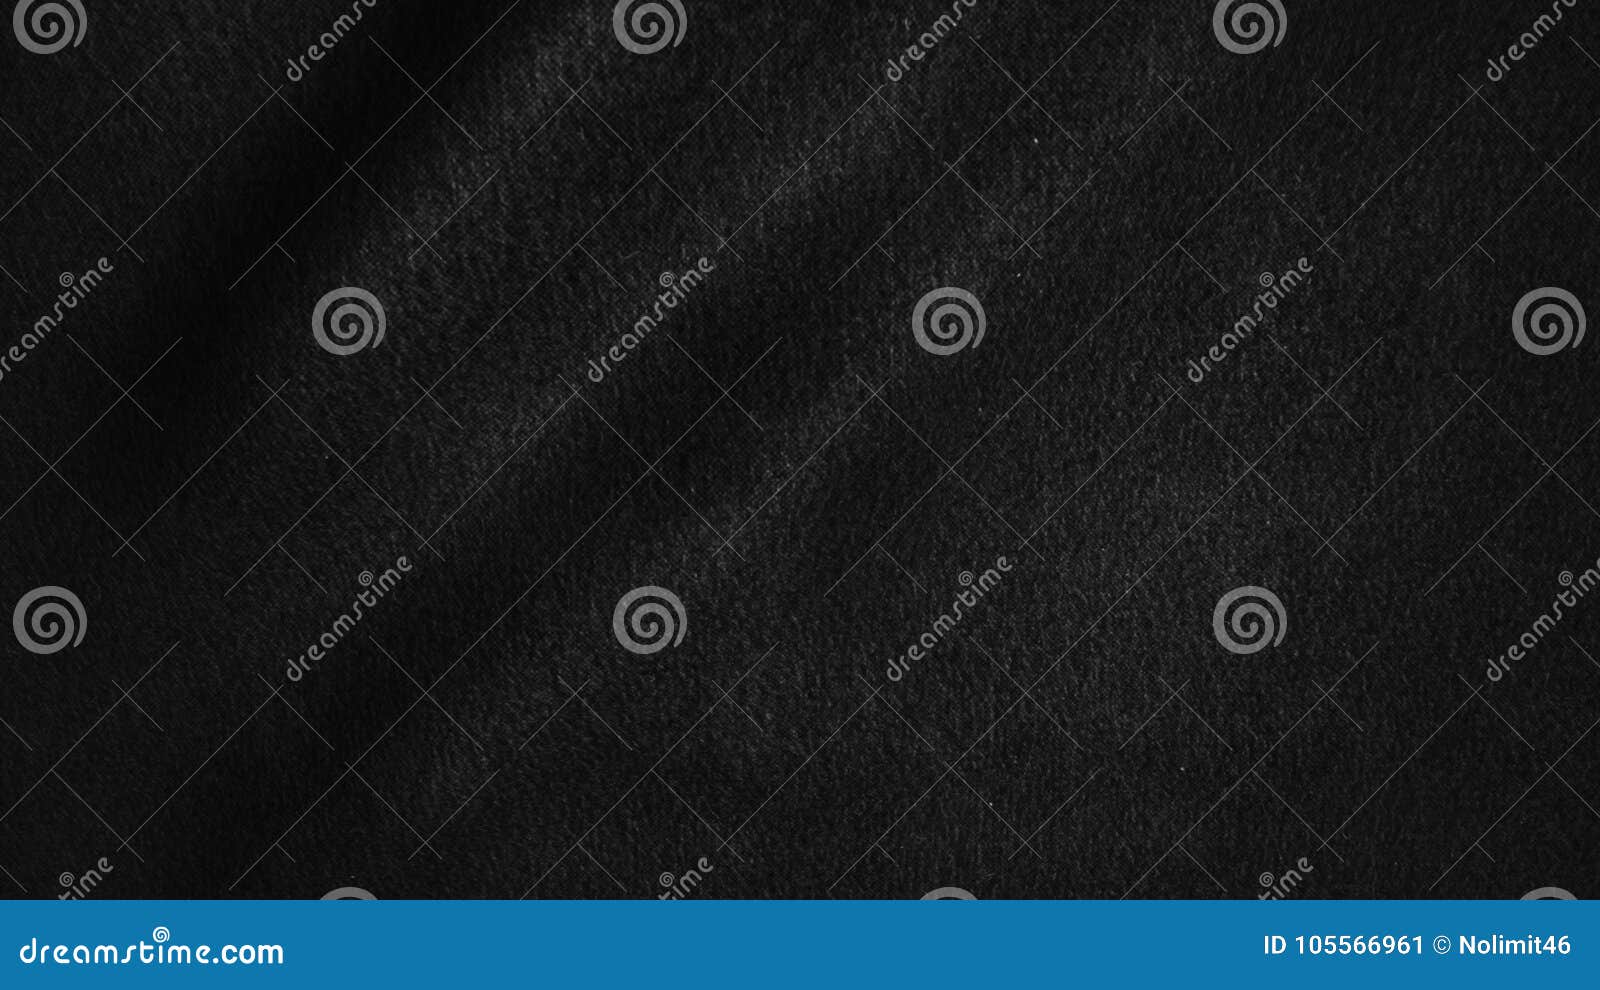 Black Cloth Background Abstract with Soft Waves. Stock Illustration ...